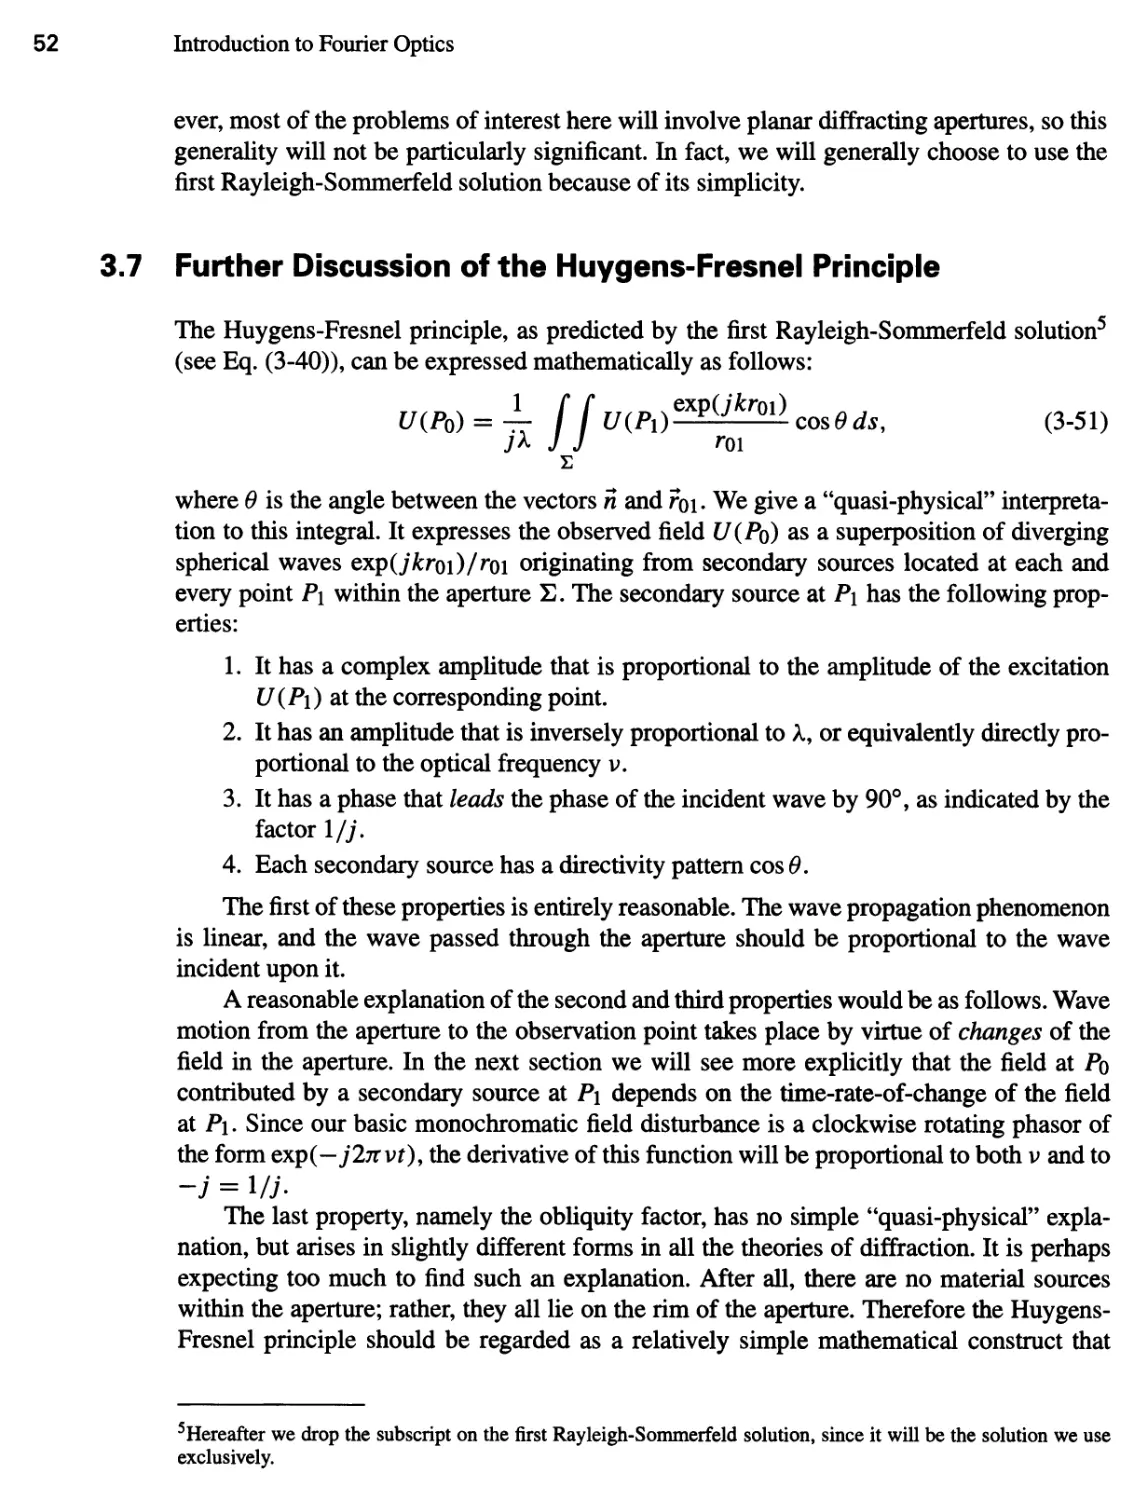 3.7 Further Discussion of the Huygens-Fresnel Principle 52